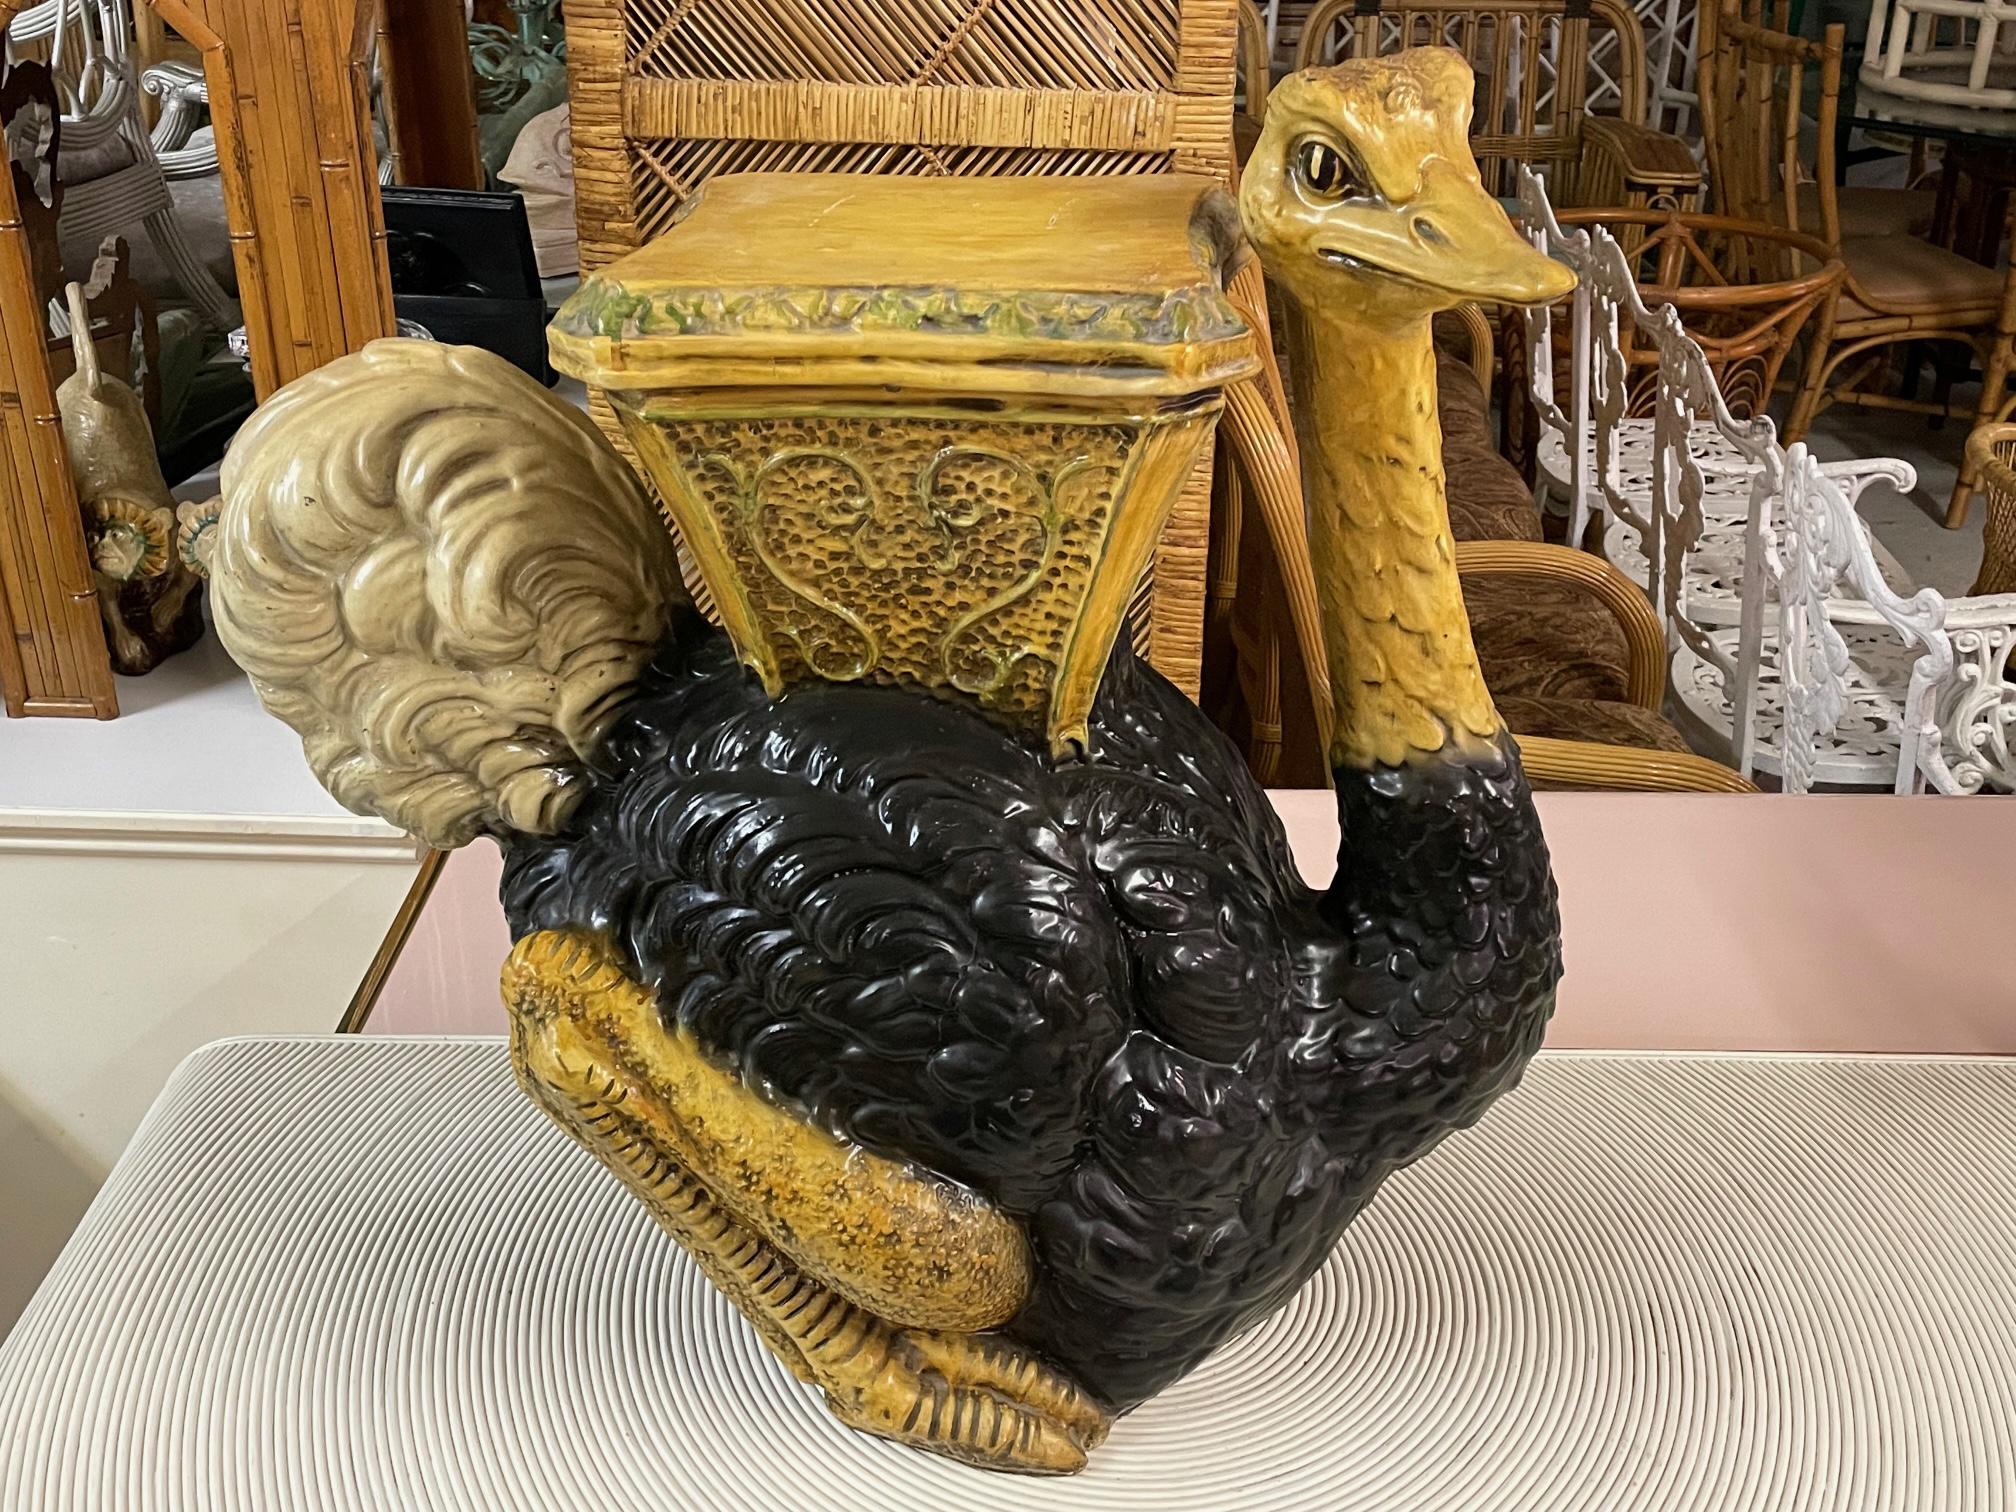 Rare large carved ostrich garden seat features vibrant black finish and stands over 25 inches tall. Good condition with minor crazing on back side and minor imperfections consistent with age (see photos). We believe the material to be terra cotta or